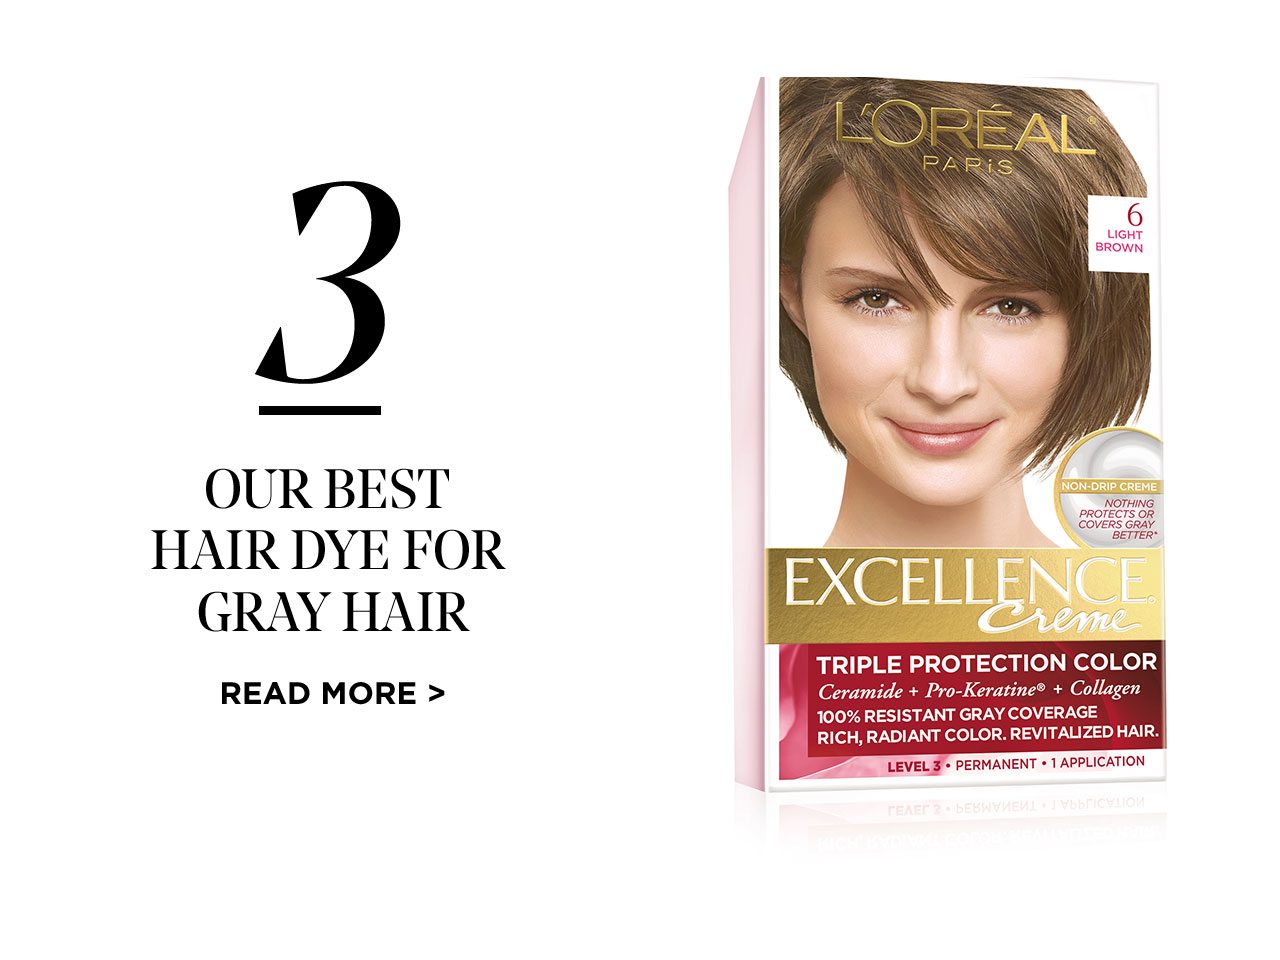 3 - OUR BEST HAIR DYE FOR GRAY HAIR - READ MORE >